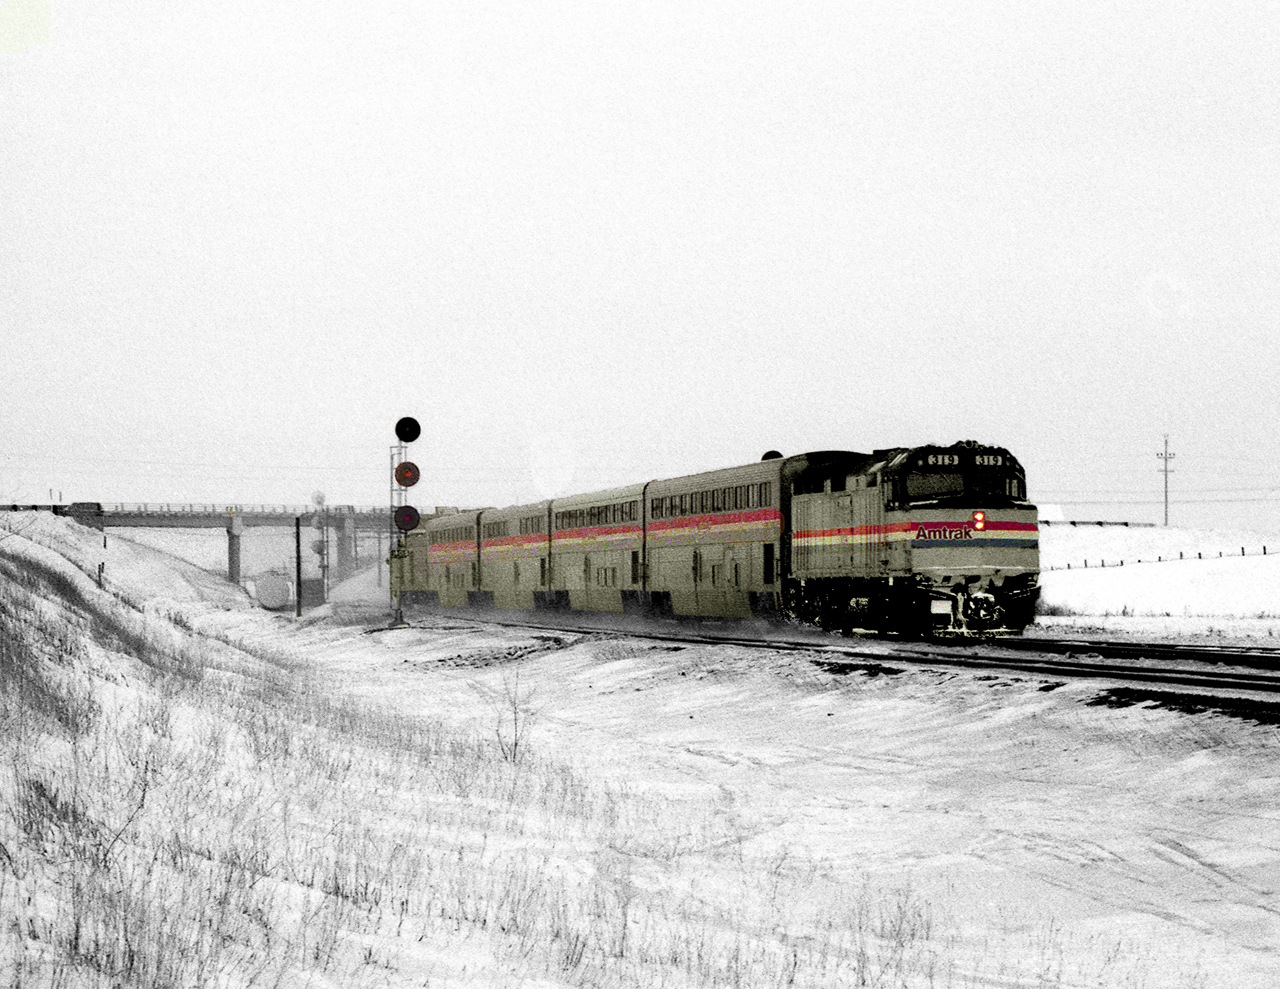 In 1985 Via Rail leased an Amtrak train set to test HEP power trains. The set was used on the Winnipeg Edmonton Panorama and on a very cold January day the eastbound passes underneath Highway 83 at Miniota between Melville and Rivers